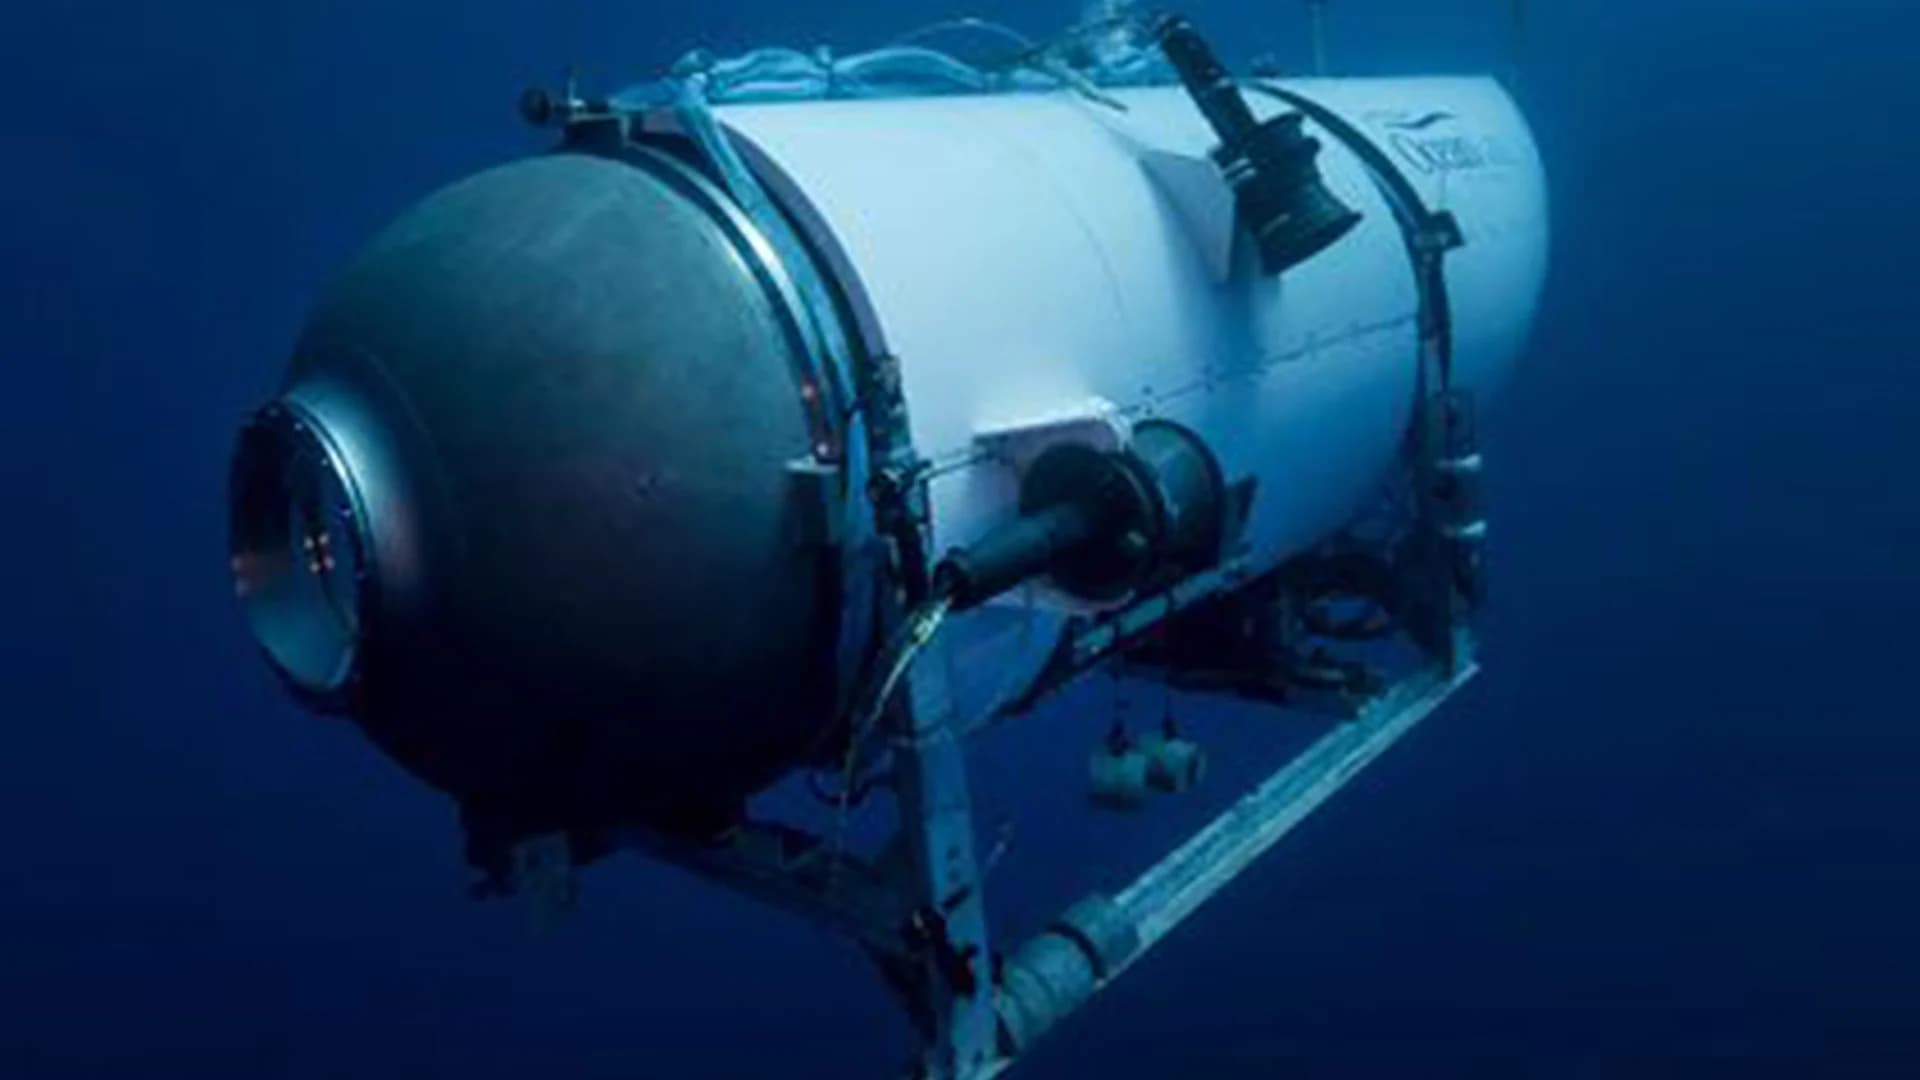 Owner of the submersible that imploded during Titanic dive suspends operations